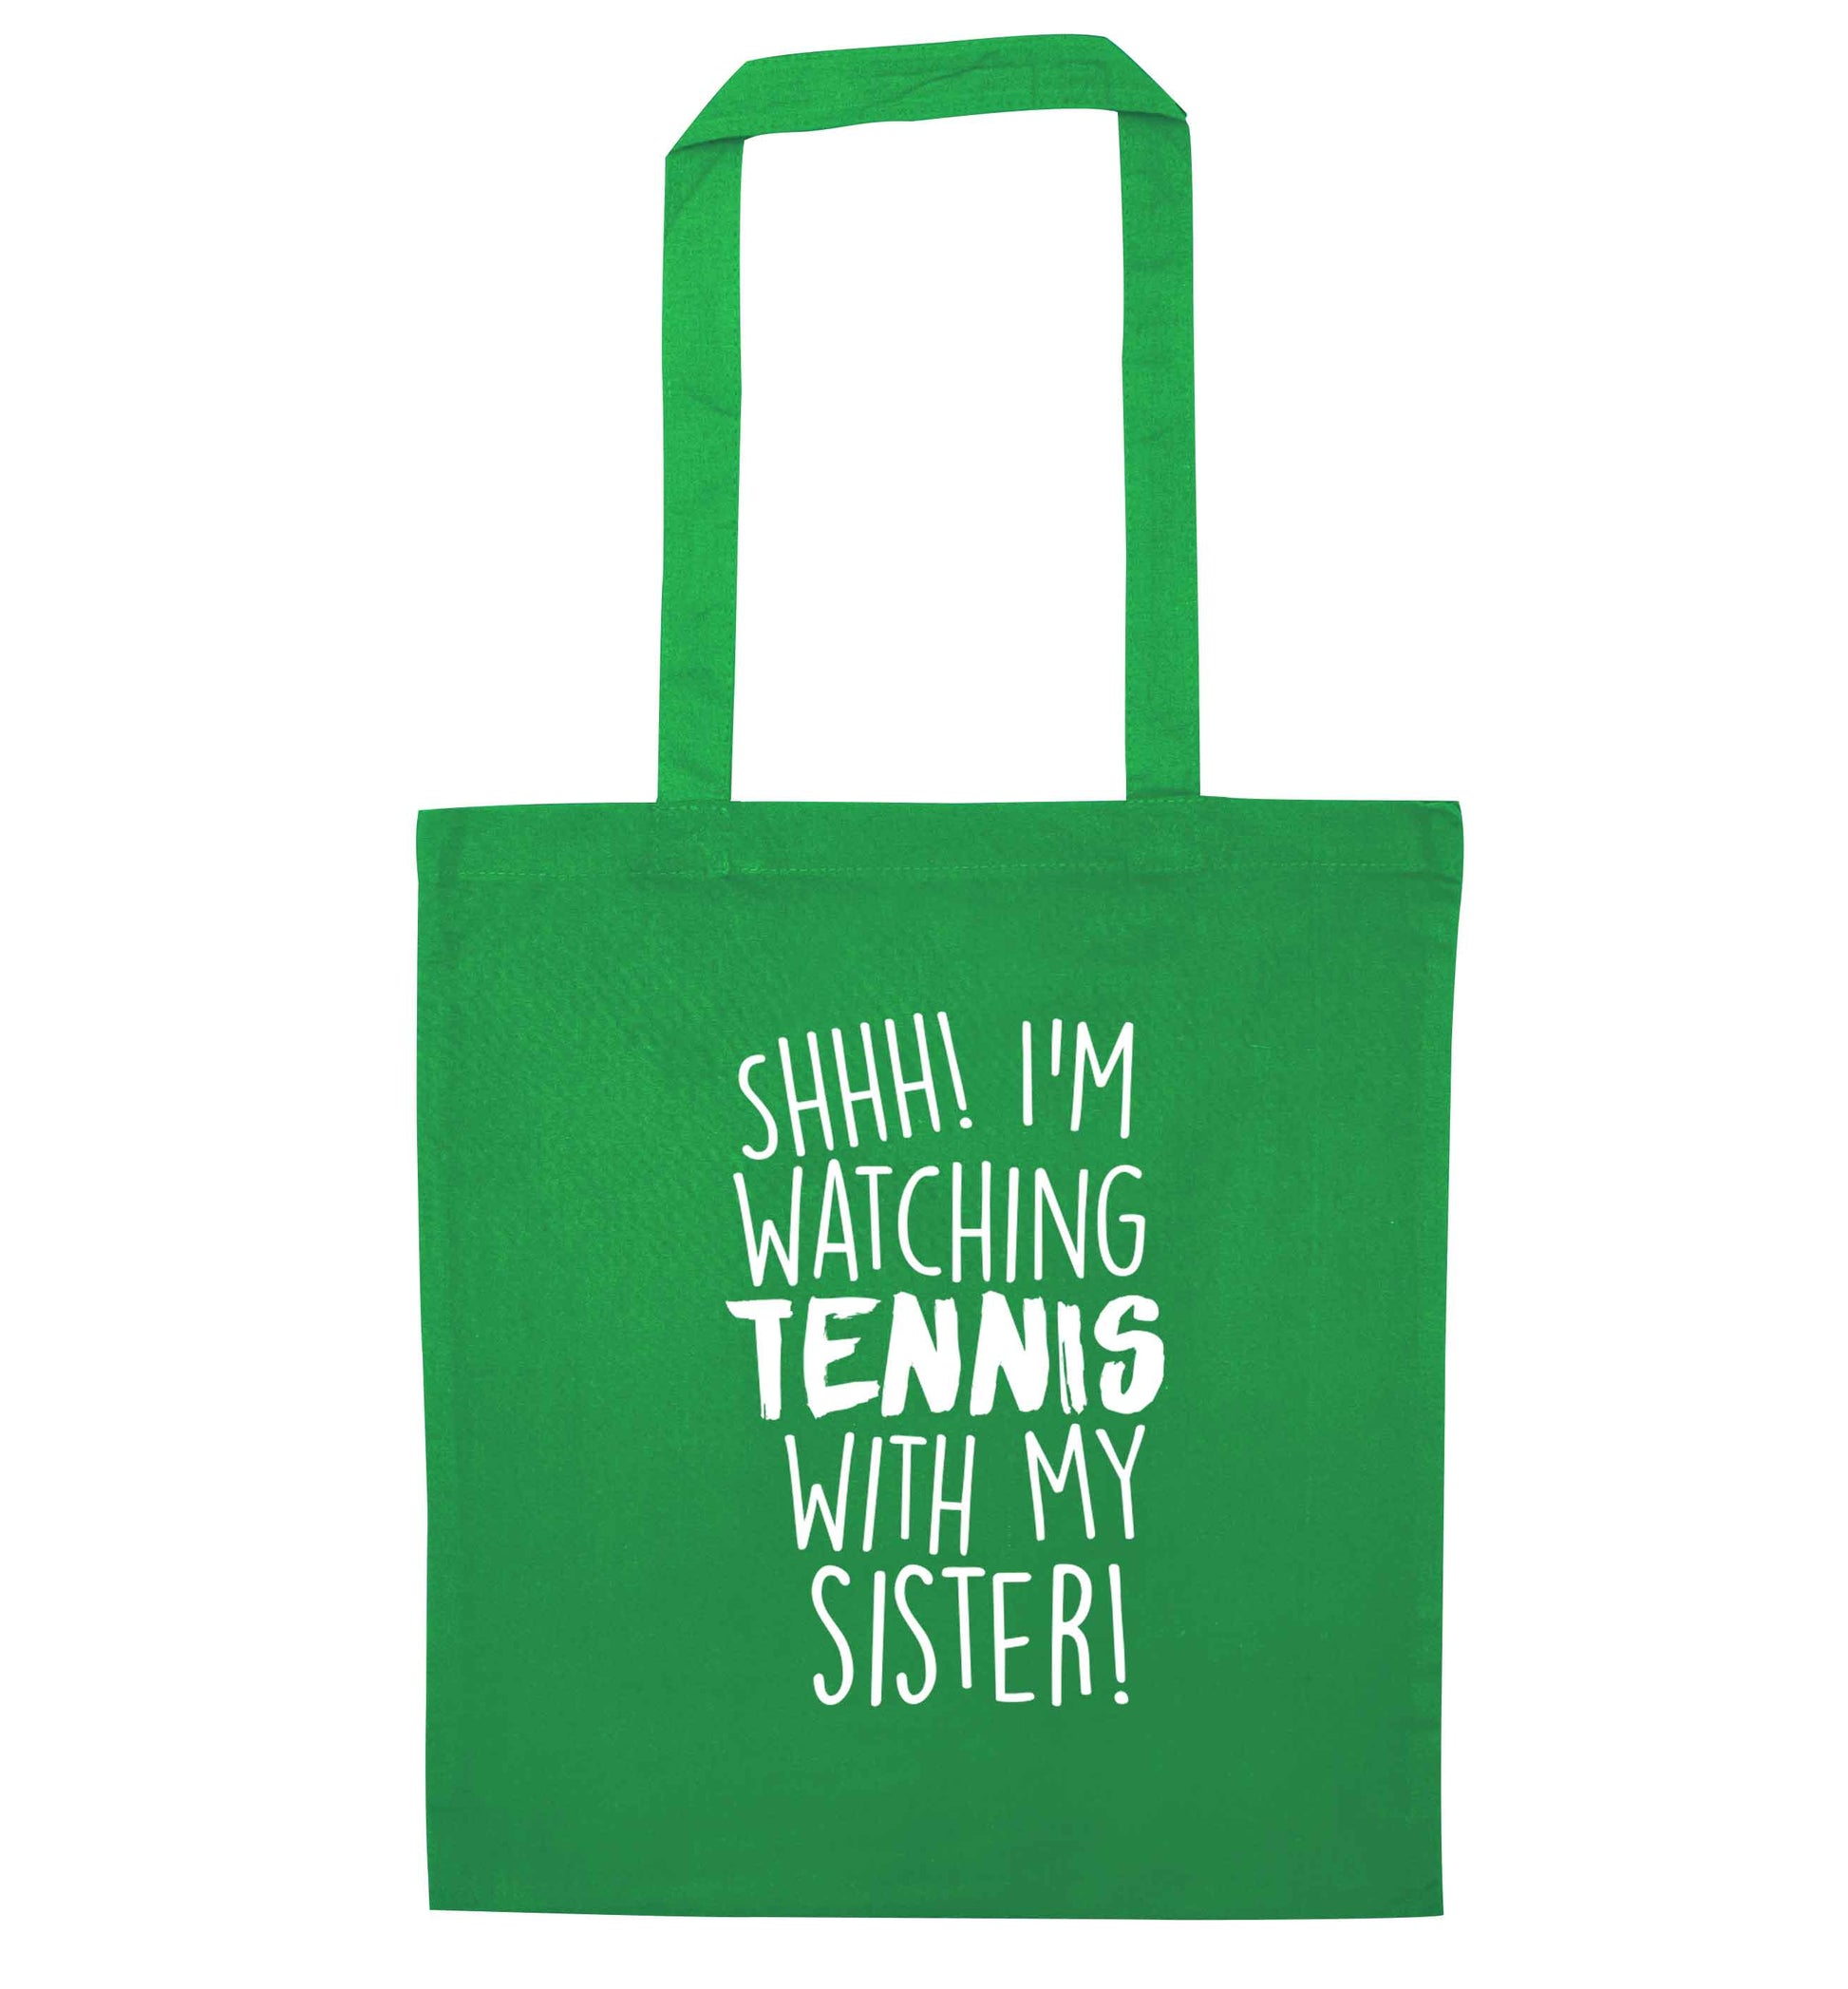 Shh! I'm watching tennis with my sister! green tote bag